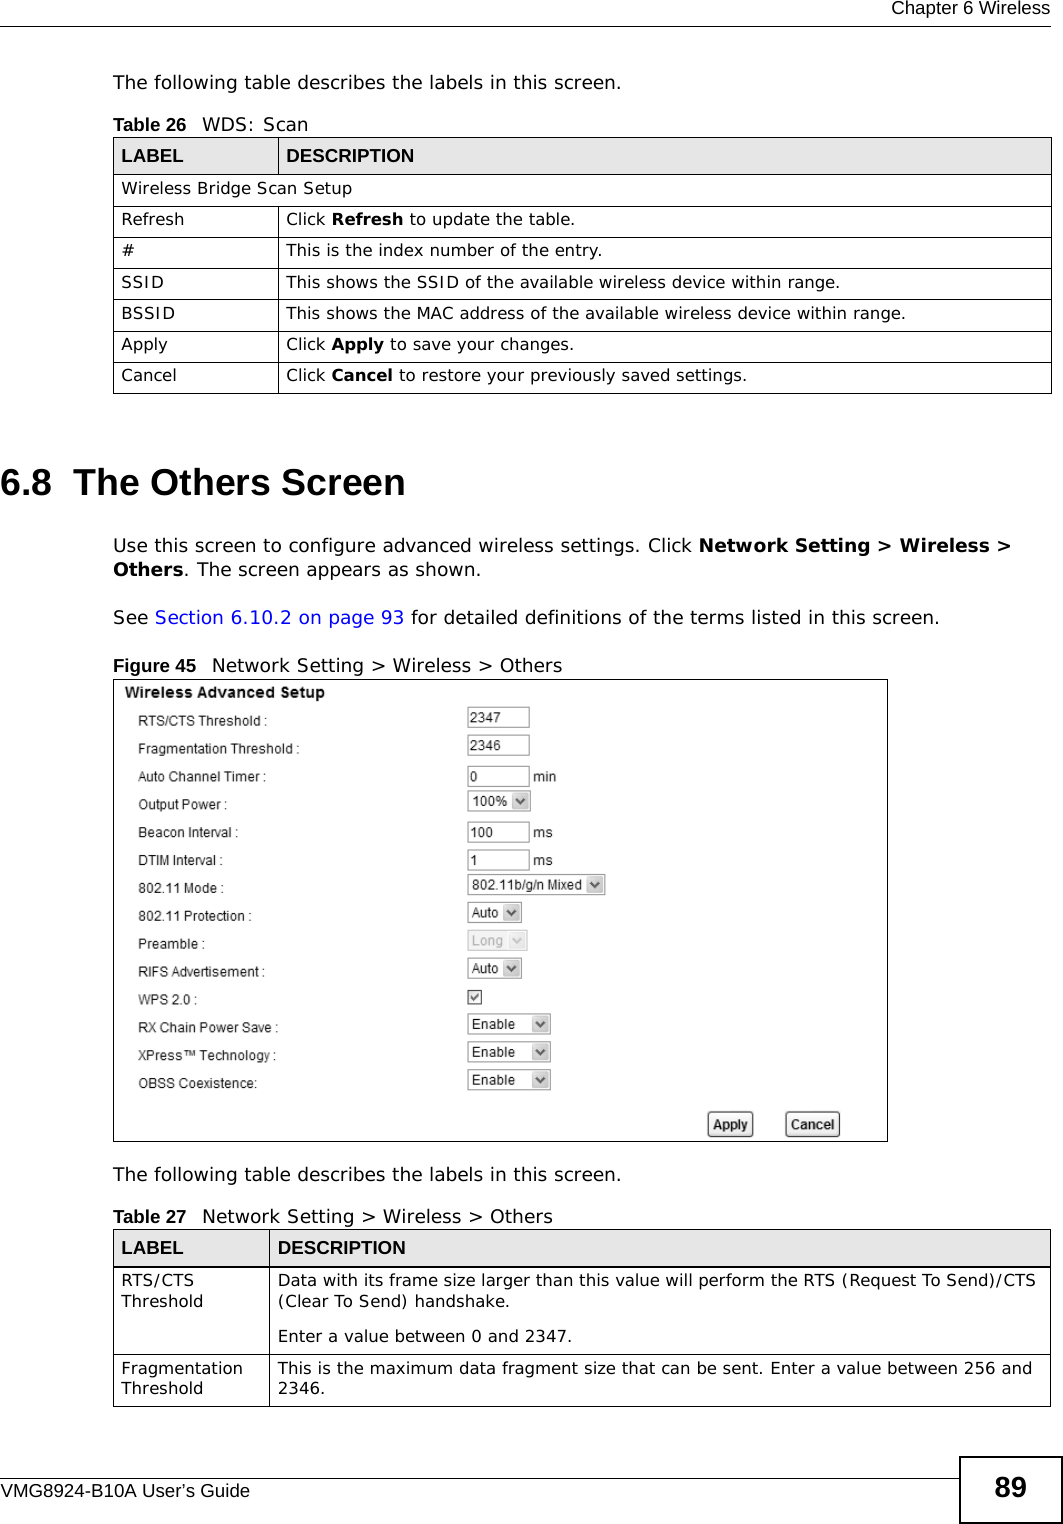  Chapter 6 WirelessVMG8924-B10A User’s Guide 89The following table describes the labels in this screen.6.8  The Others ScreenUse this screen to configure advanced wireless settings. Click Network Setting &gt; Wireless &gt; Others. The screen appears as shown.See Section 6.10.2 on page 93 for detailed definitions of the terms listed in this screen.Figure 45   Network Setting &gt; Wireless &gt; OthersThe following table describes the labels in this screen. Table 26   WDS: ScanLABEL DESCRIPTIONWireless Bridge Scan SetupRefresh Click Refresh to update the table. # This is the index number of the entry.SSID This shows the SSID of the available wireless device within range.BSSID This shows the MAC address of the available wireless device within range.Apply Click Apply to save your changes.Cancel Click Cancel to restore your previously saved settings.Table 27   Network Setting &gt; Wireless &gt; OthersLABEL DESCRIPTIONRTS/CTS Threshold Data with its frame size larger than this value will perform the RTS (Request To Send)/CTS (Clear To Send) handshake. Enter a value between 0 and 2347. Fragmentation Threshold This is the maximum data fragment size that can be sent. Enter a value between 256 and 2346. 